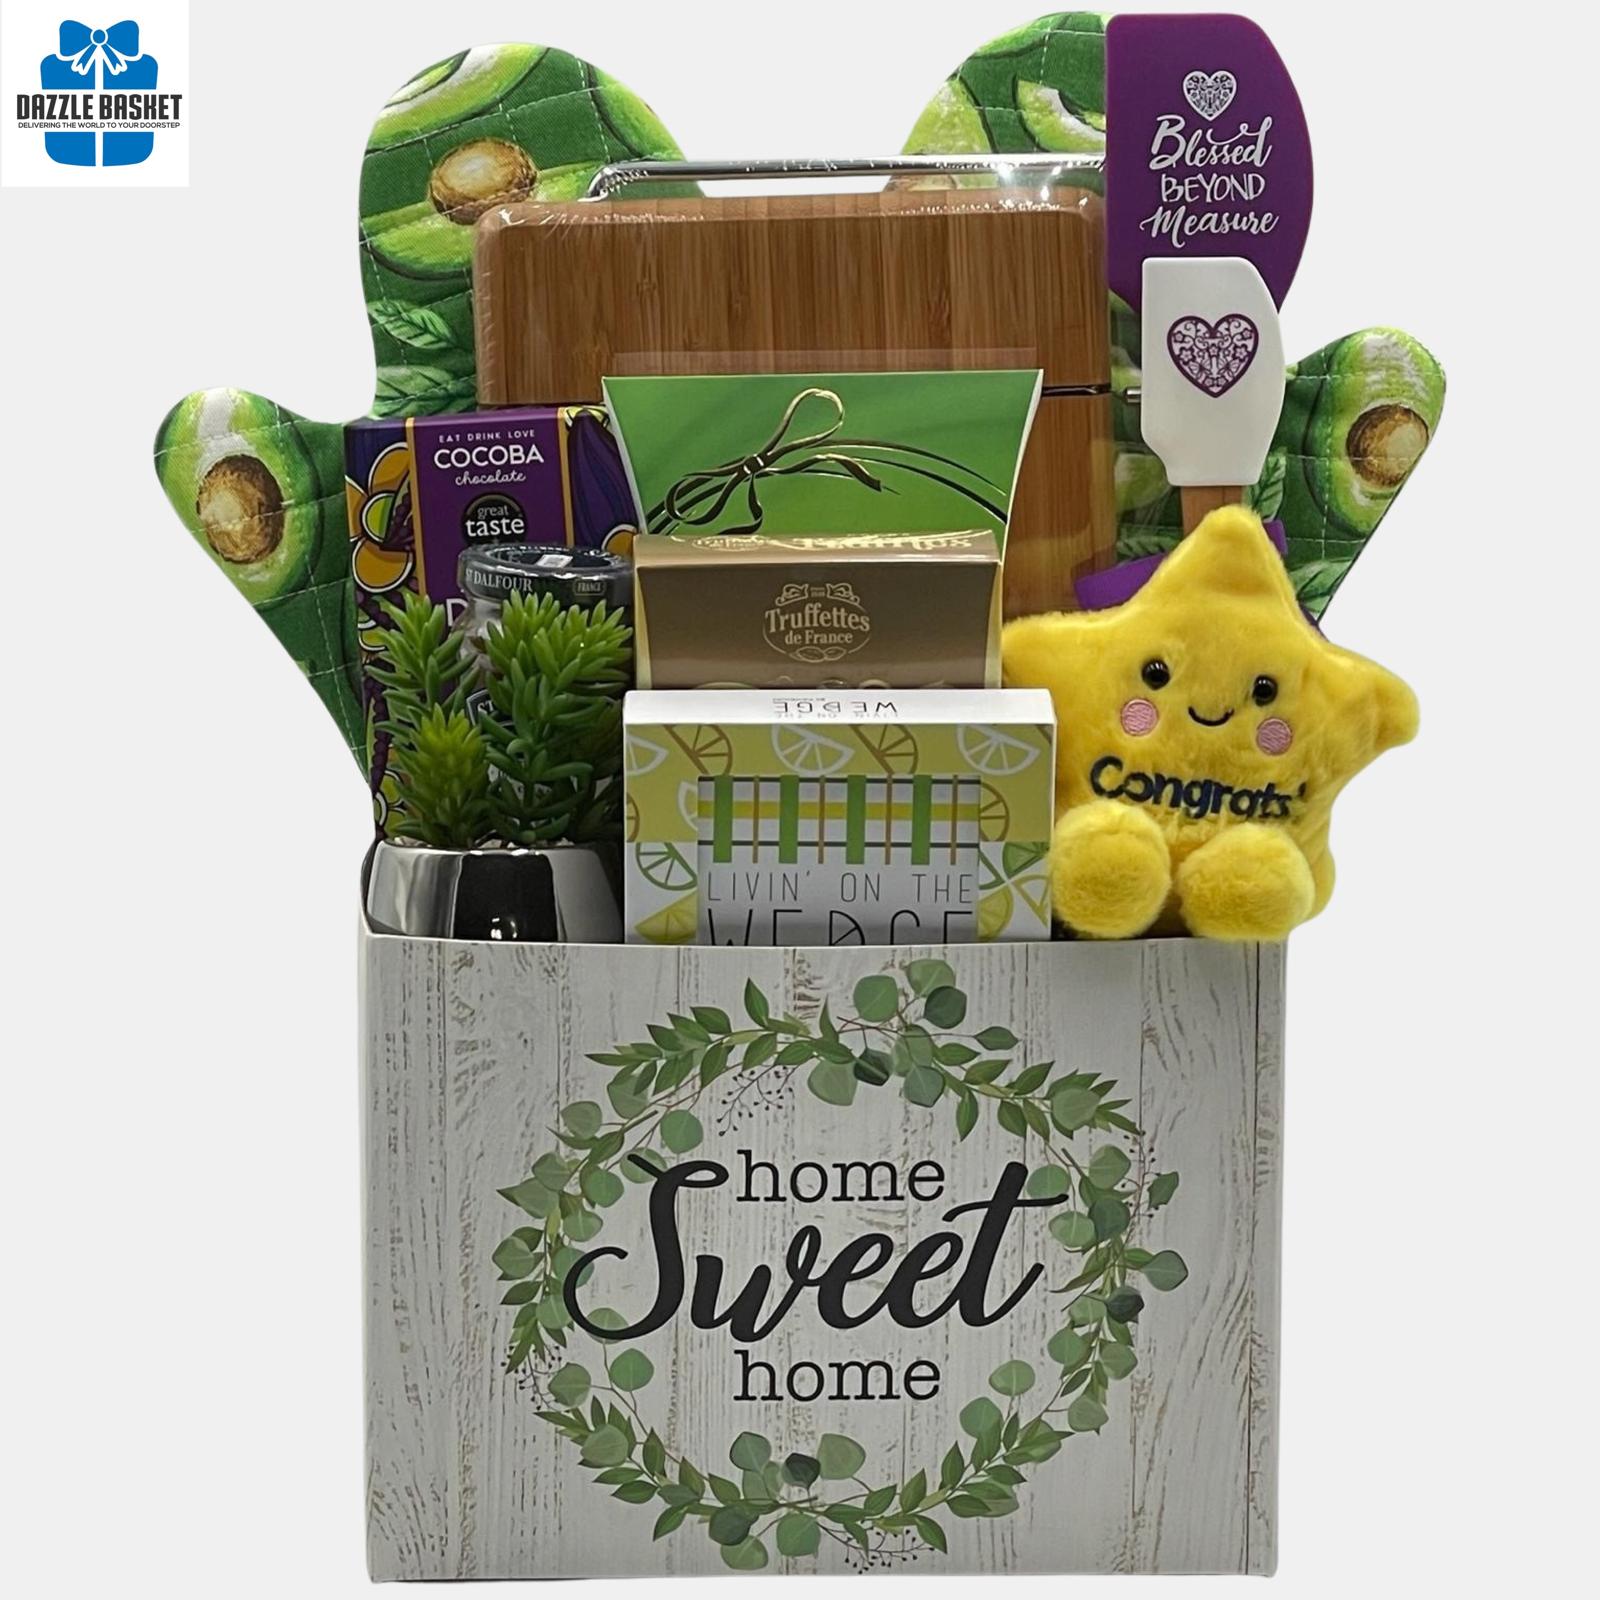 A made in Calgary housewarming gift basket that includes gourmet sweet and savory snacks & household products to go with it. It also has a plush cow toy. The products are arranged neatly in a "Home Sweet Home" container. 